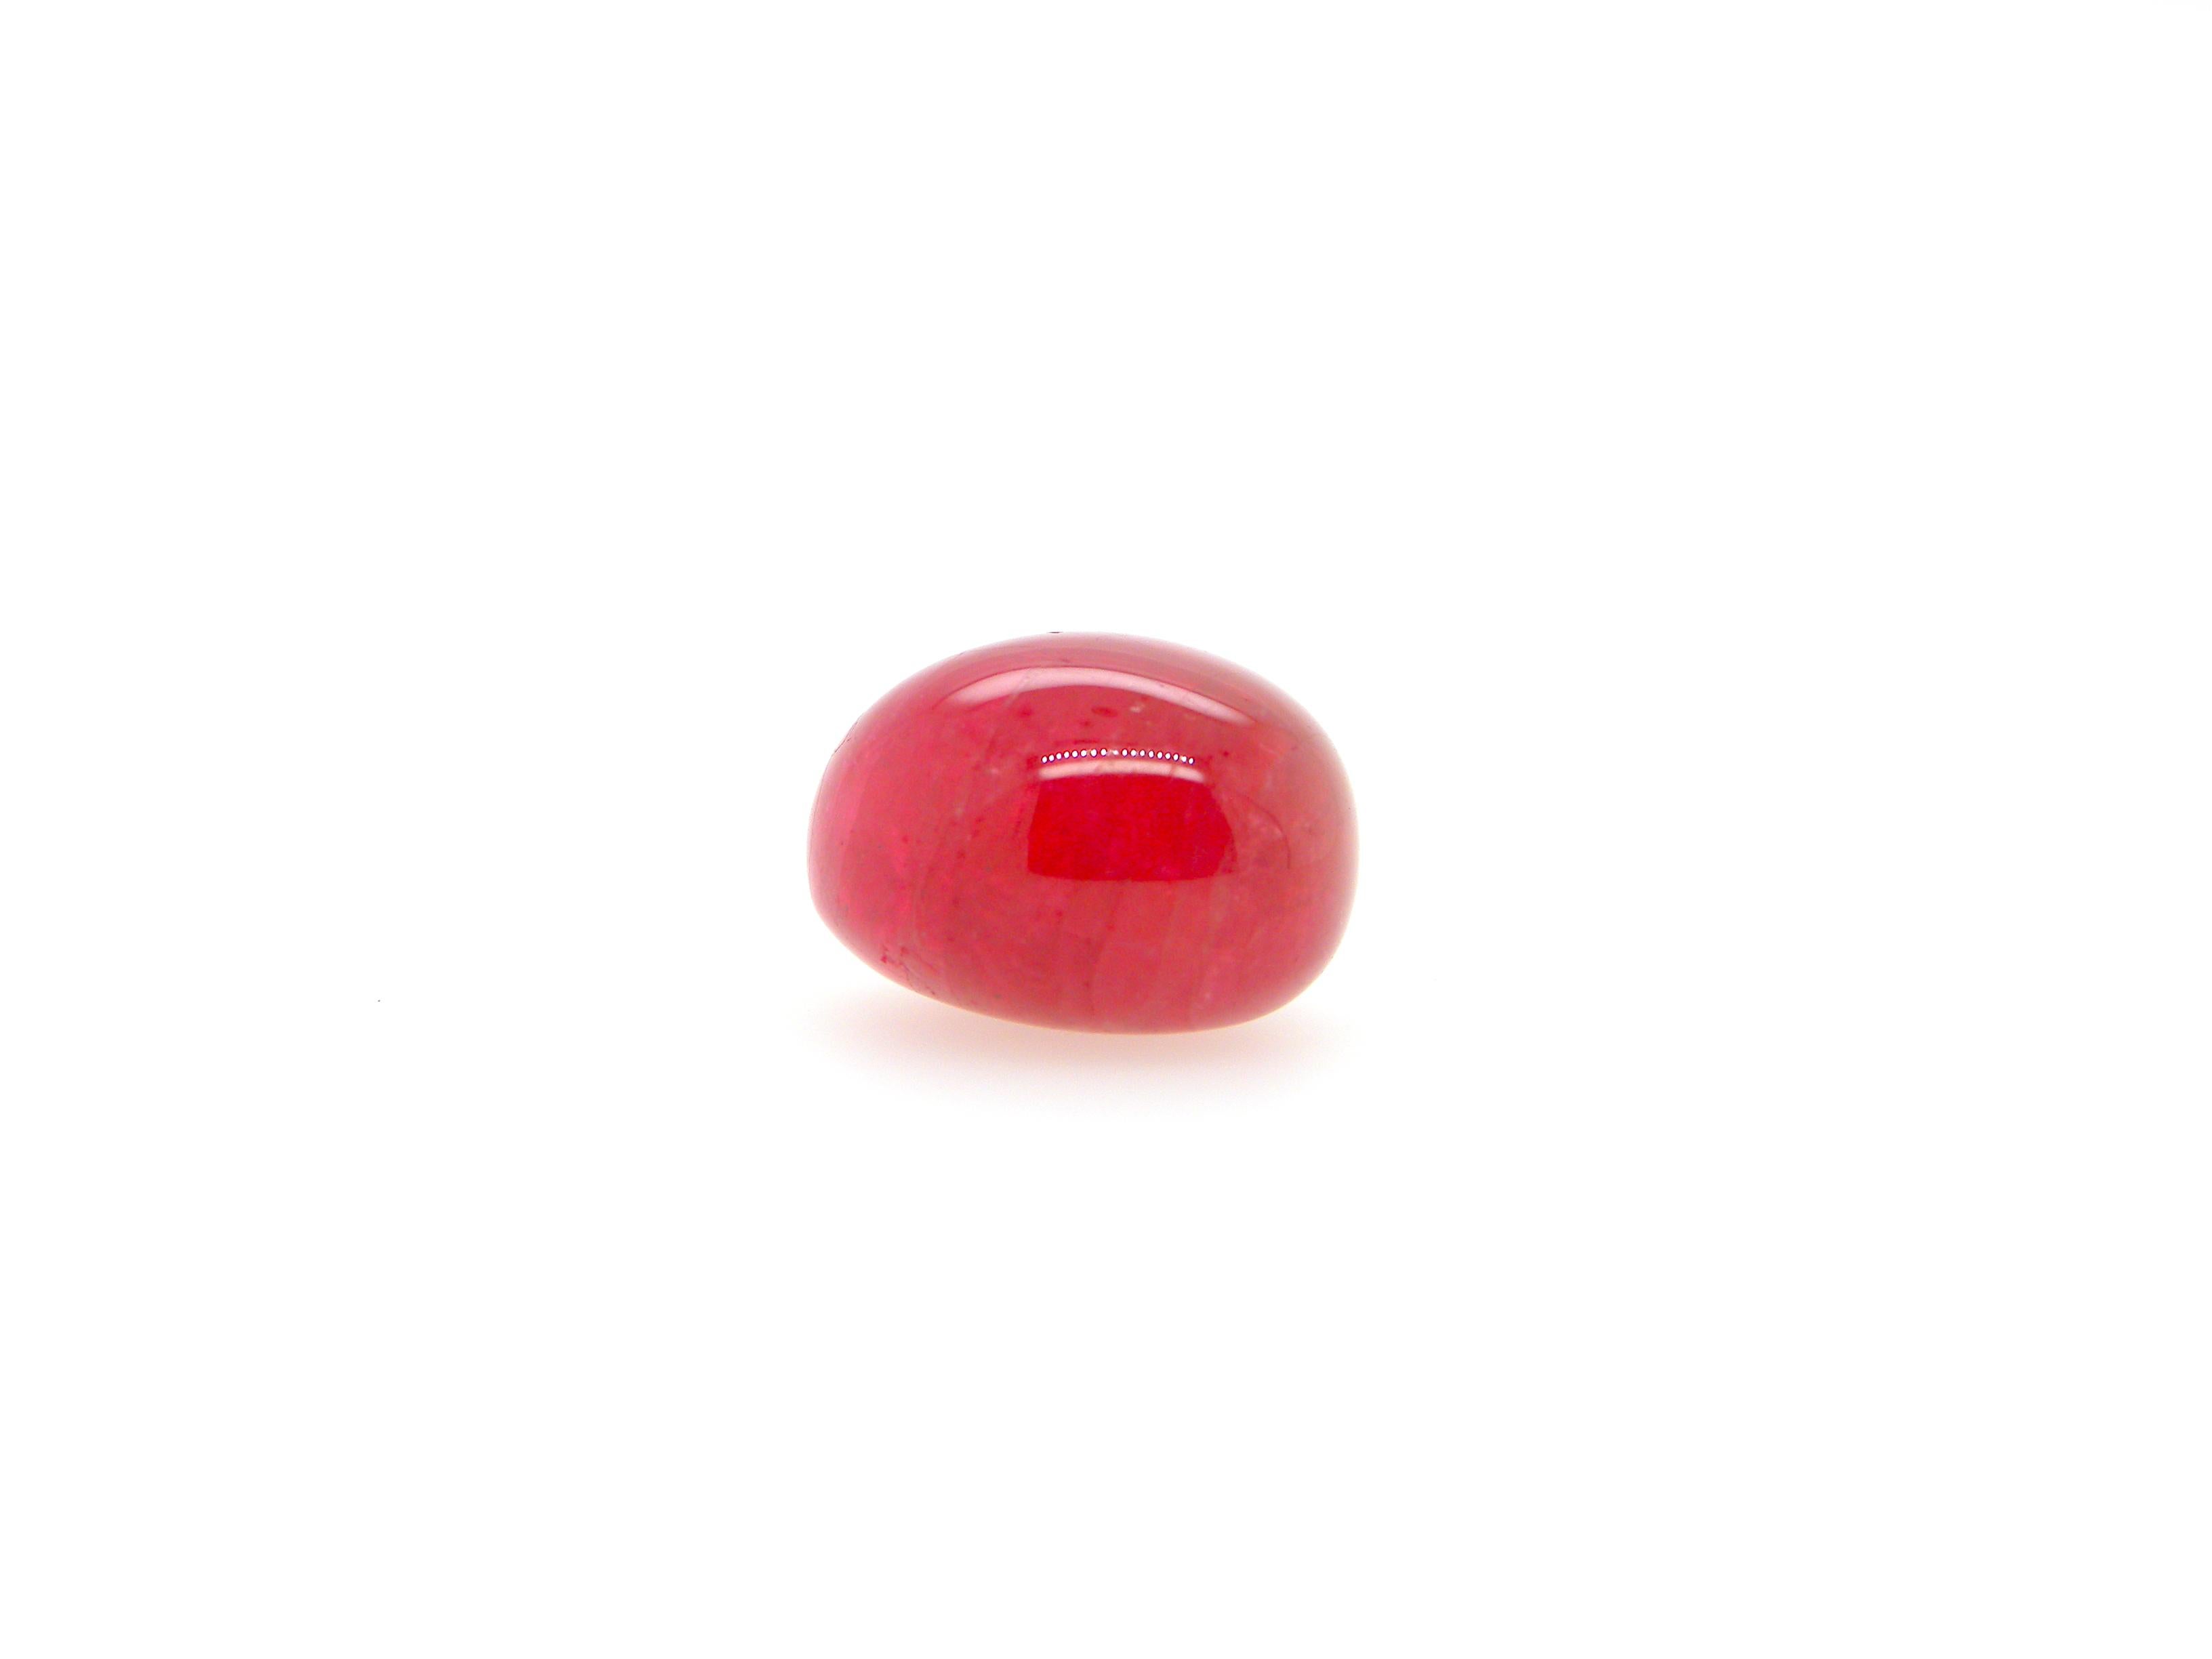 18 Carat Burma No Heat Red Spinel Cabochon For Sale 2